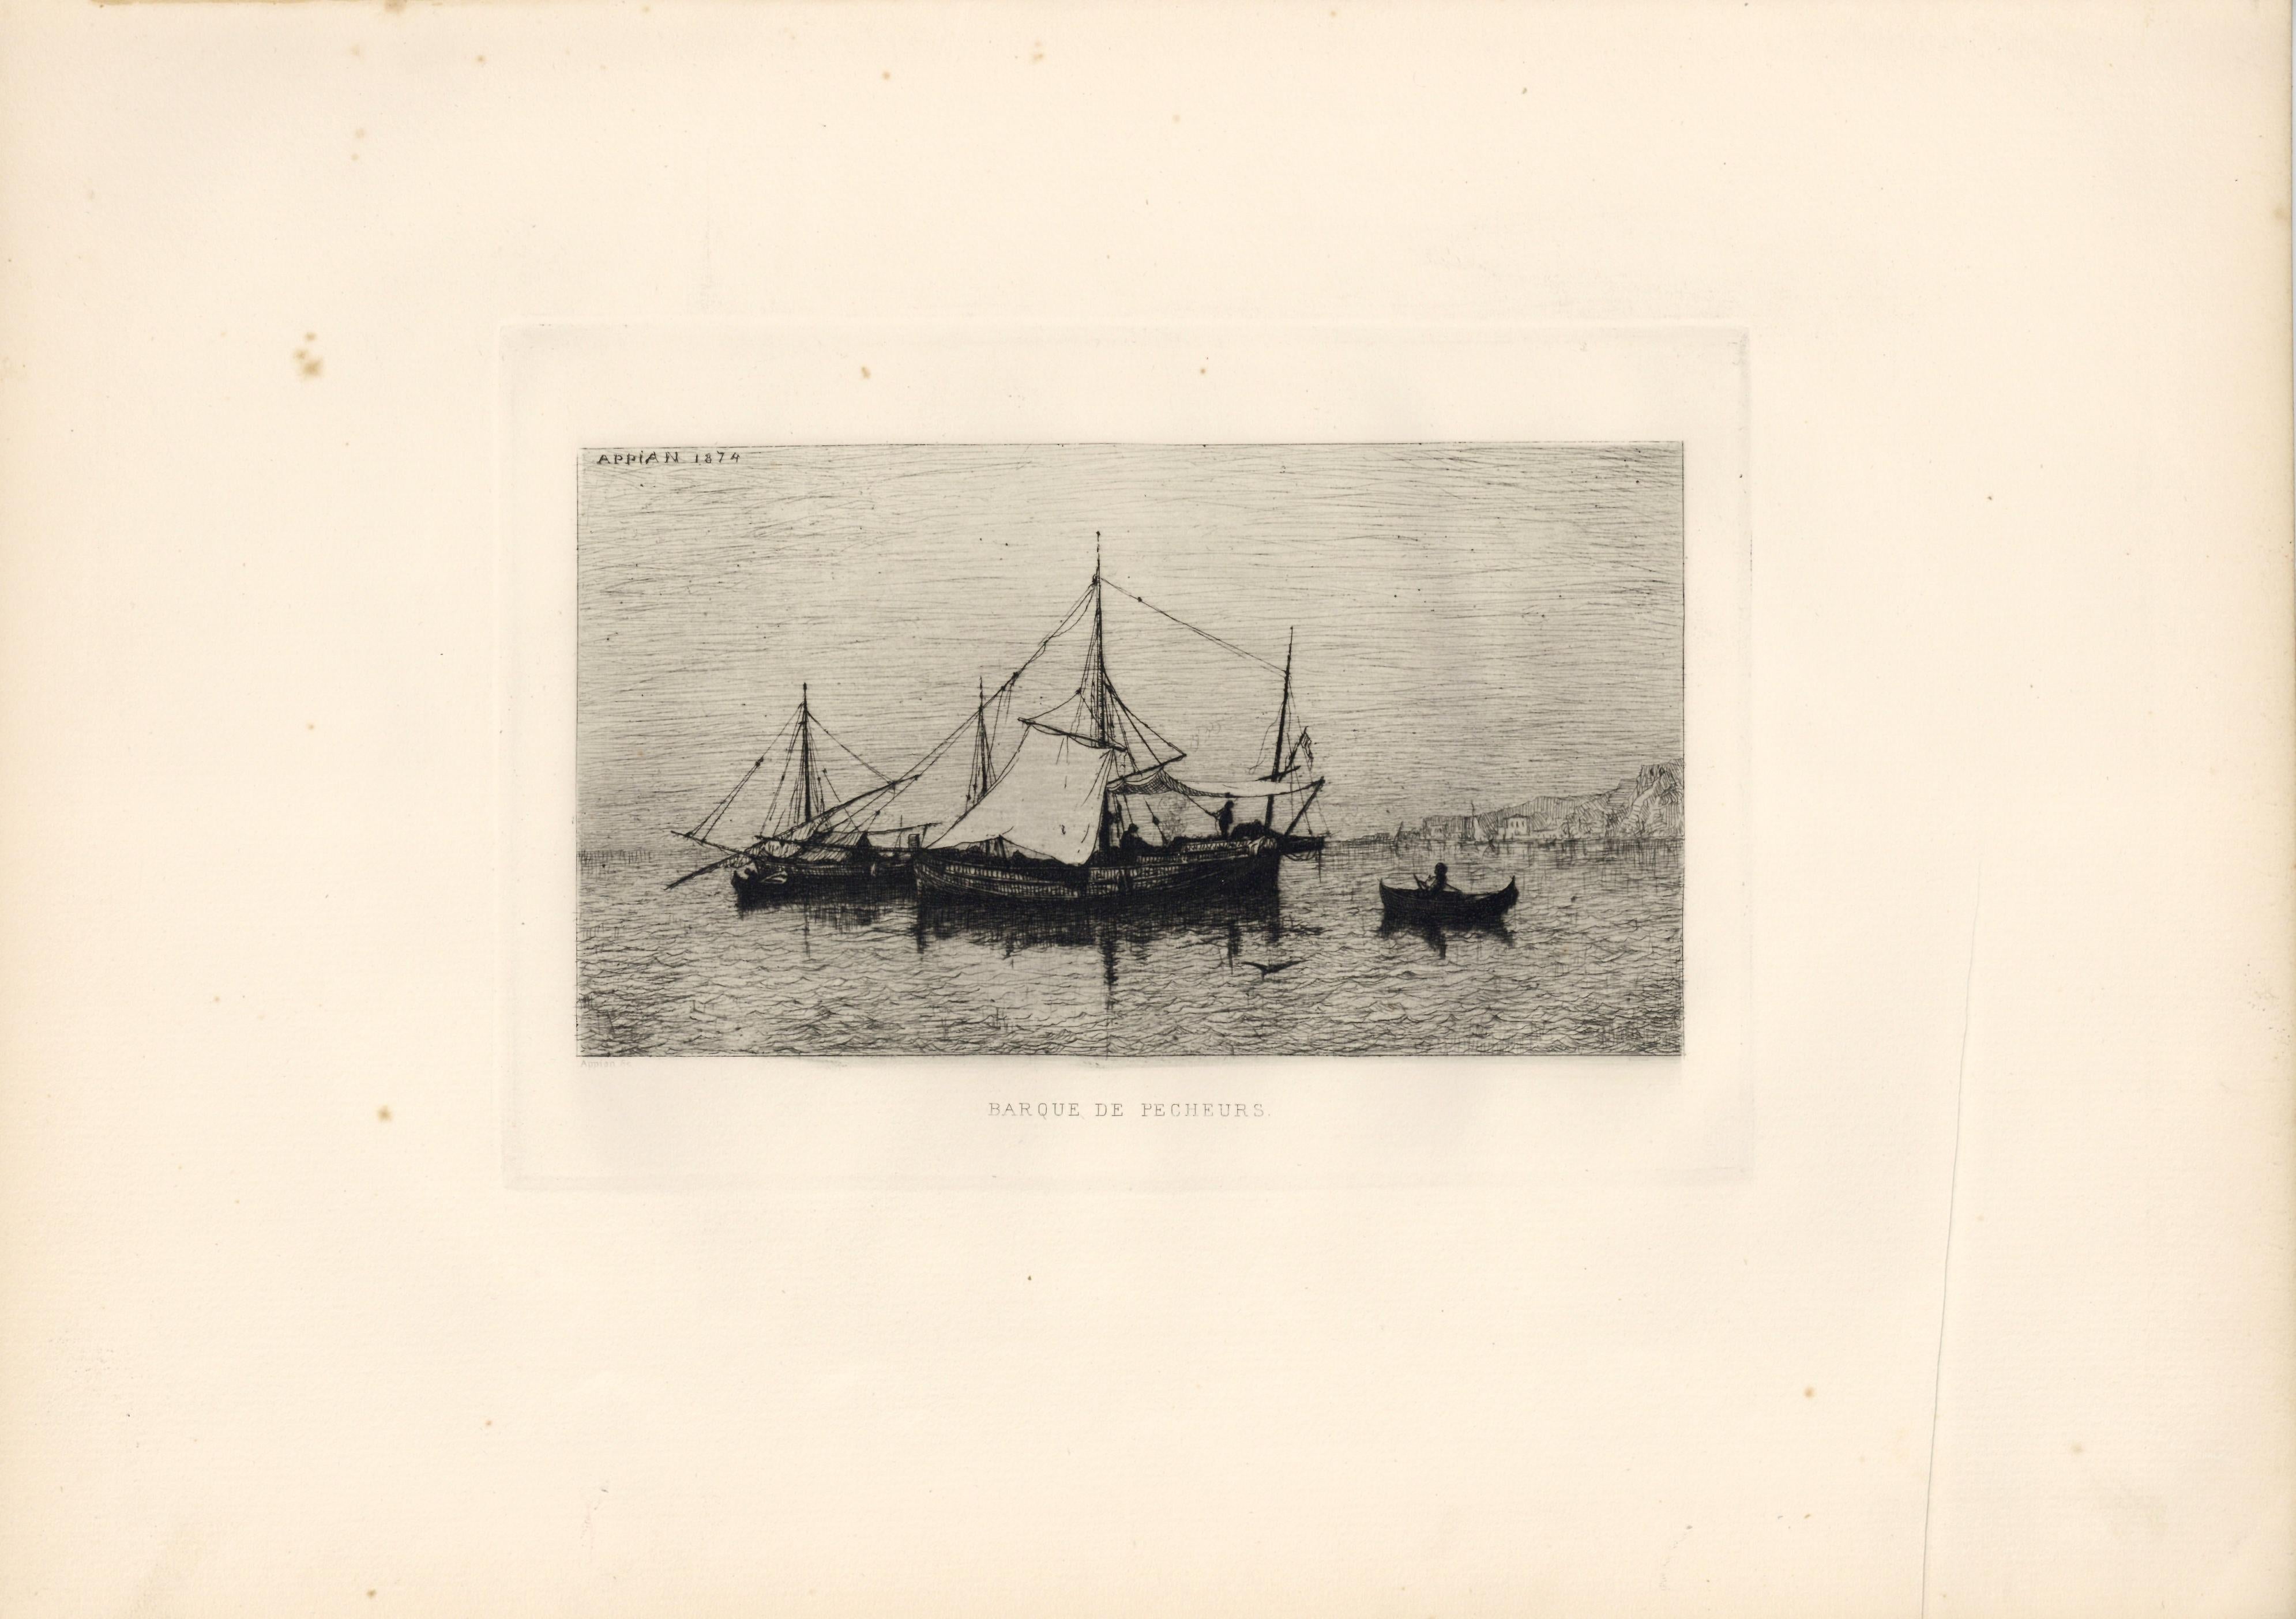 Medium: original etching. This impression on cream laid paper is from the edition printed for 